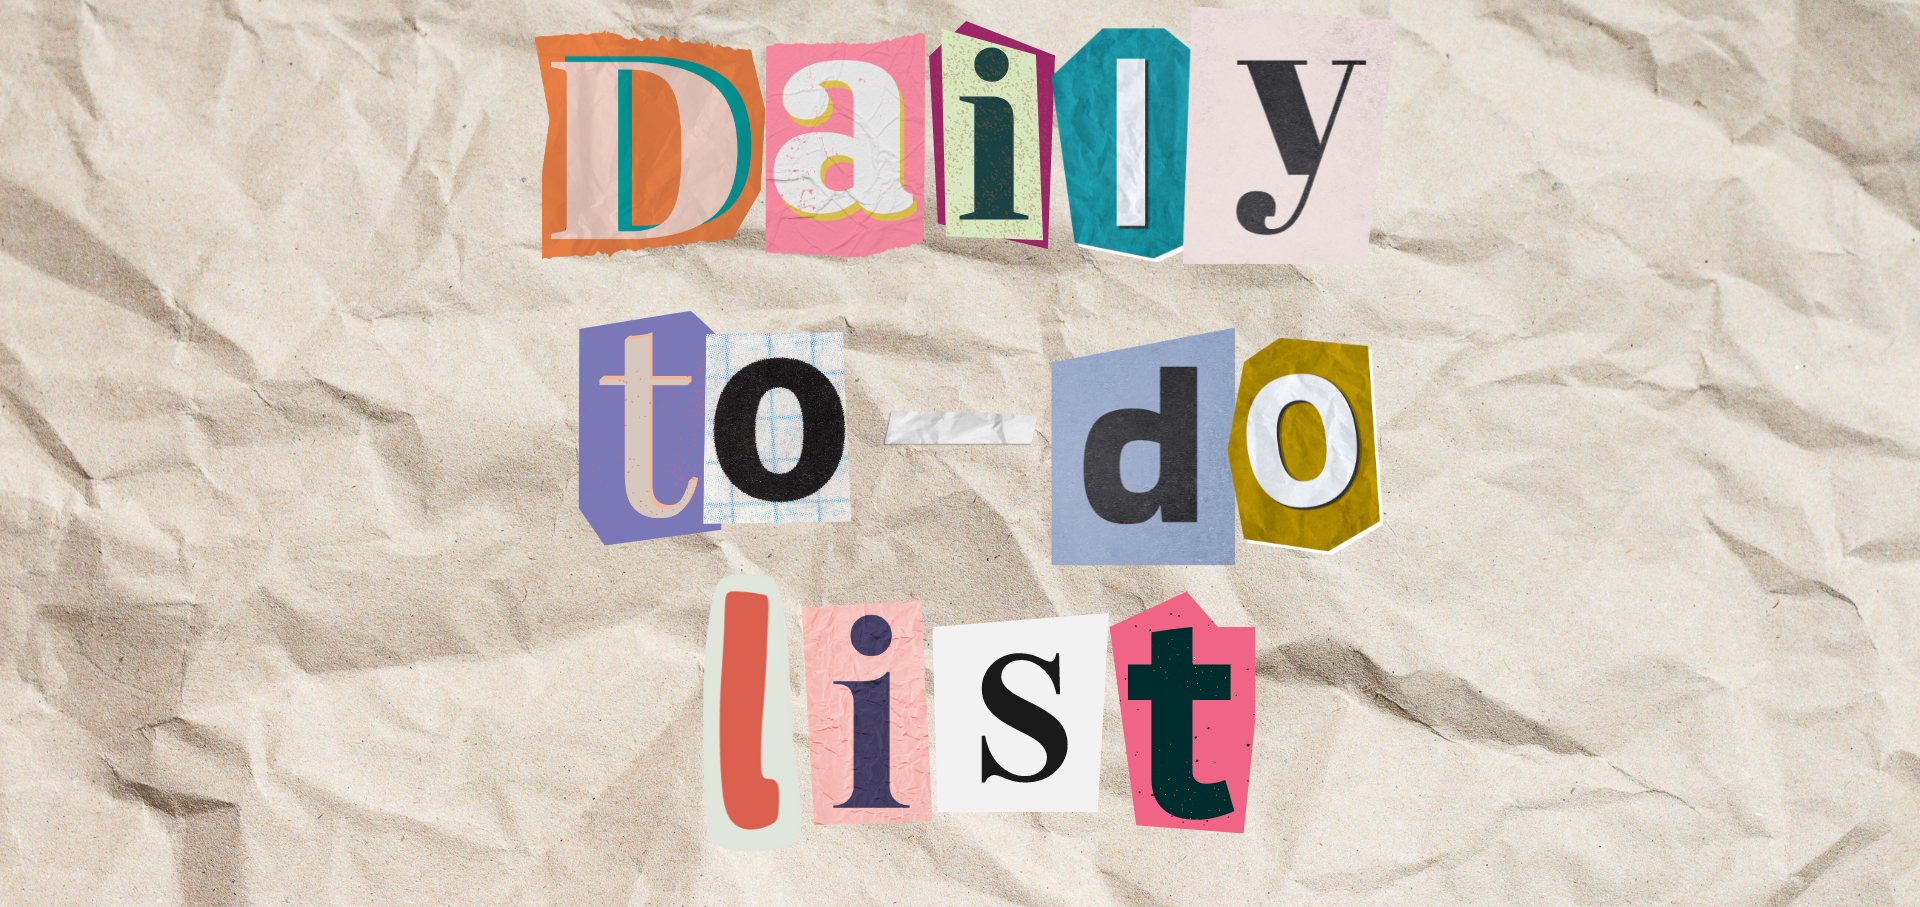 Collage of cutout letters spelling &quot;Daily to do list&quot; on a crumpled paper background